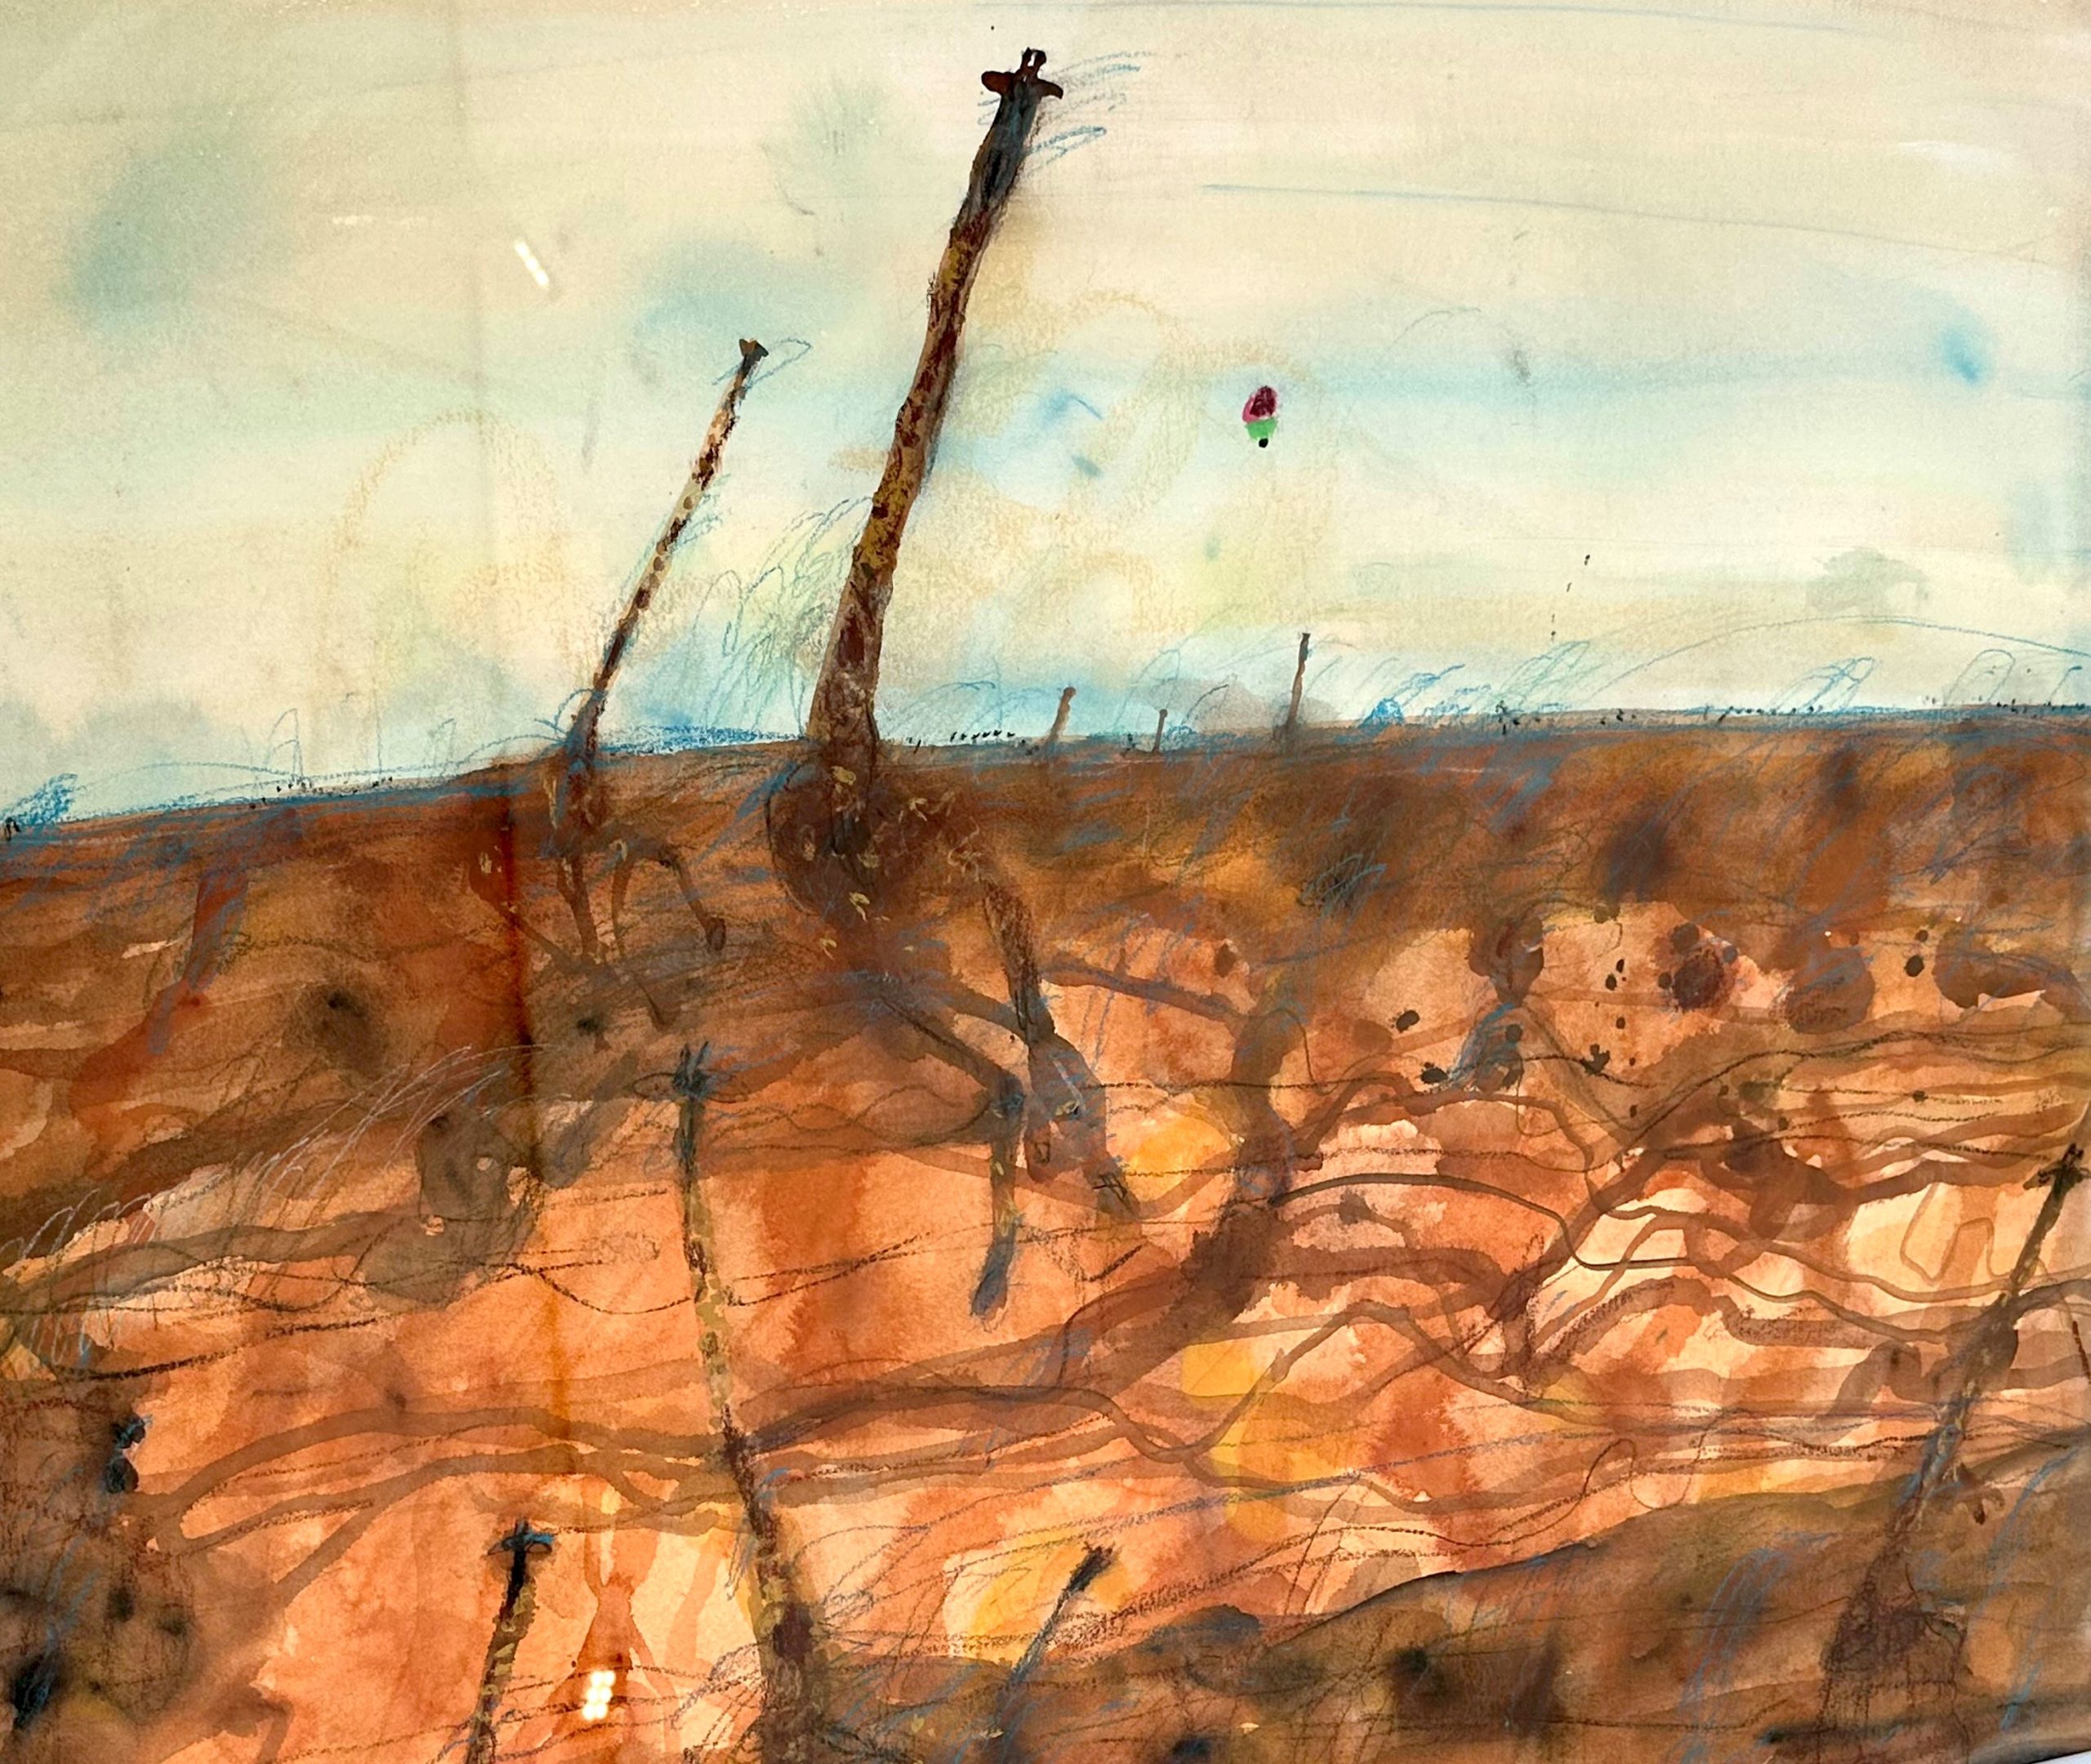 John Olsen, 'Giraffes and Balloon', 2004, watercolour and crayon on paper, 88 x 99cm, $130,000 | Provenance: Private Collection, Sydney; Savill Galleries, Sydney.